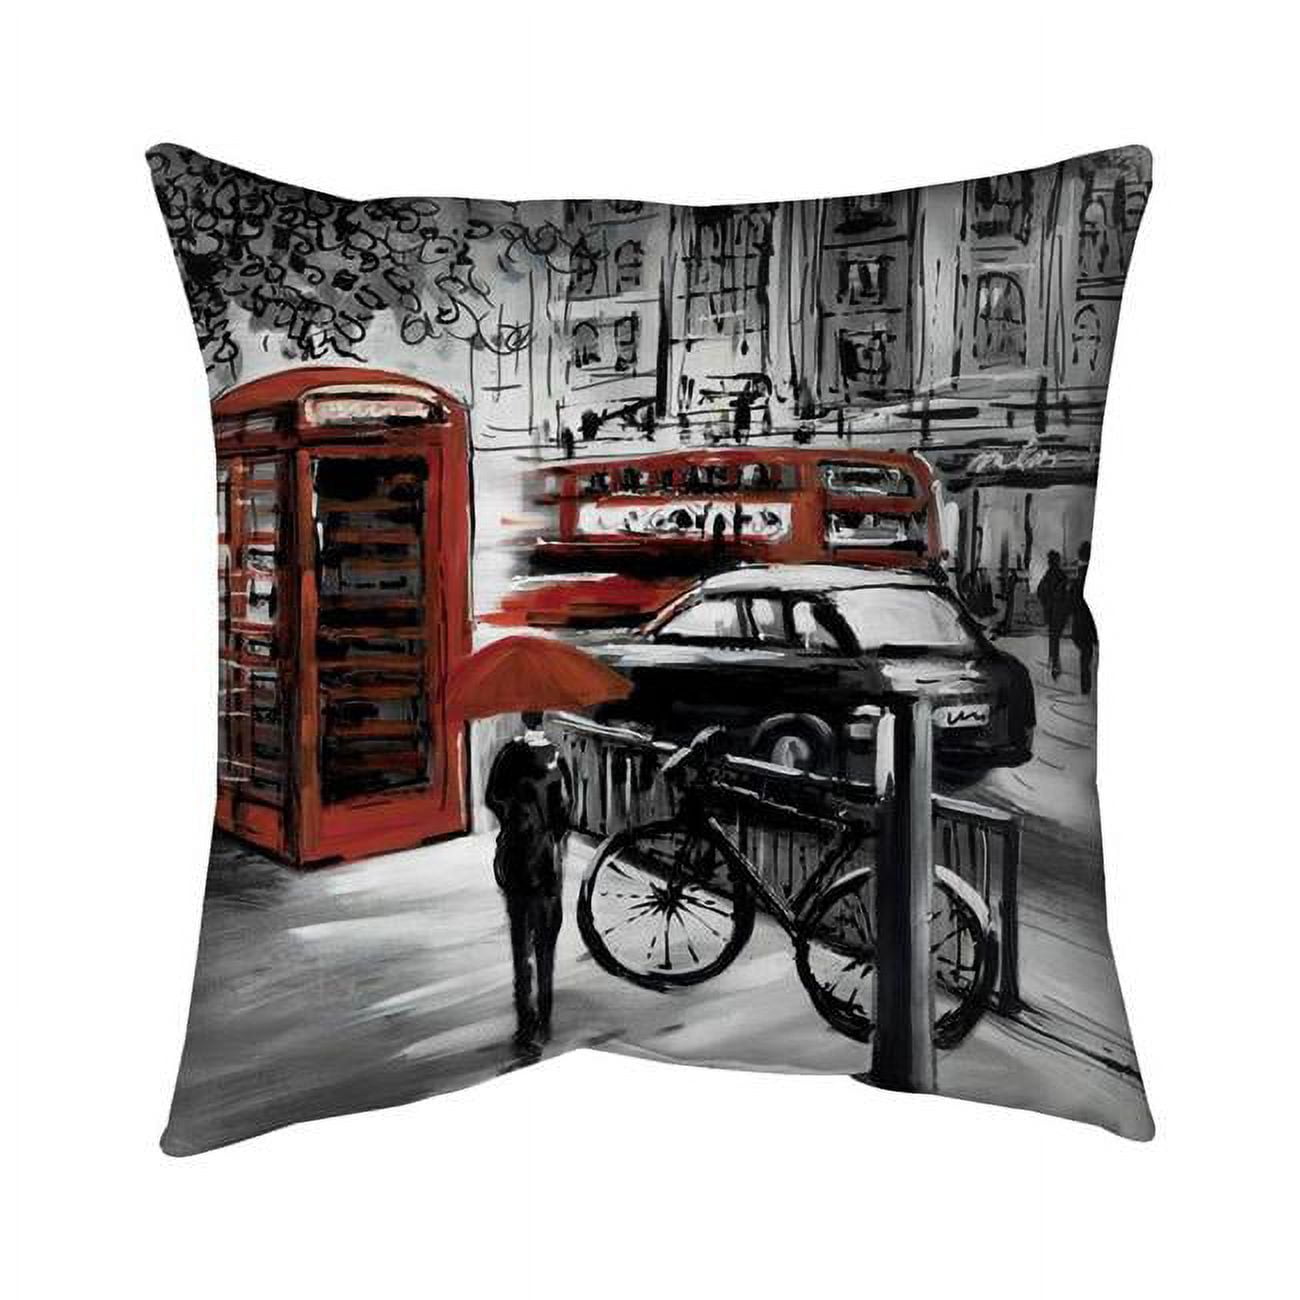 Begin Home Decor 5542-1616-CI11 16 x 16 in. European Street-Double Sided Print Outdoor Pillow Cover